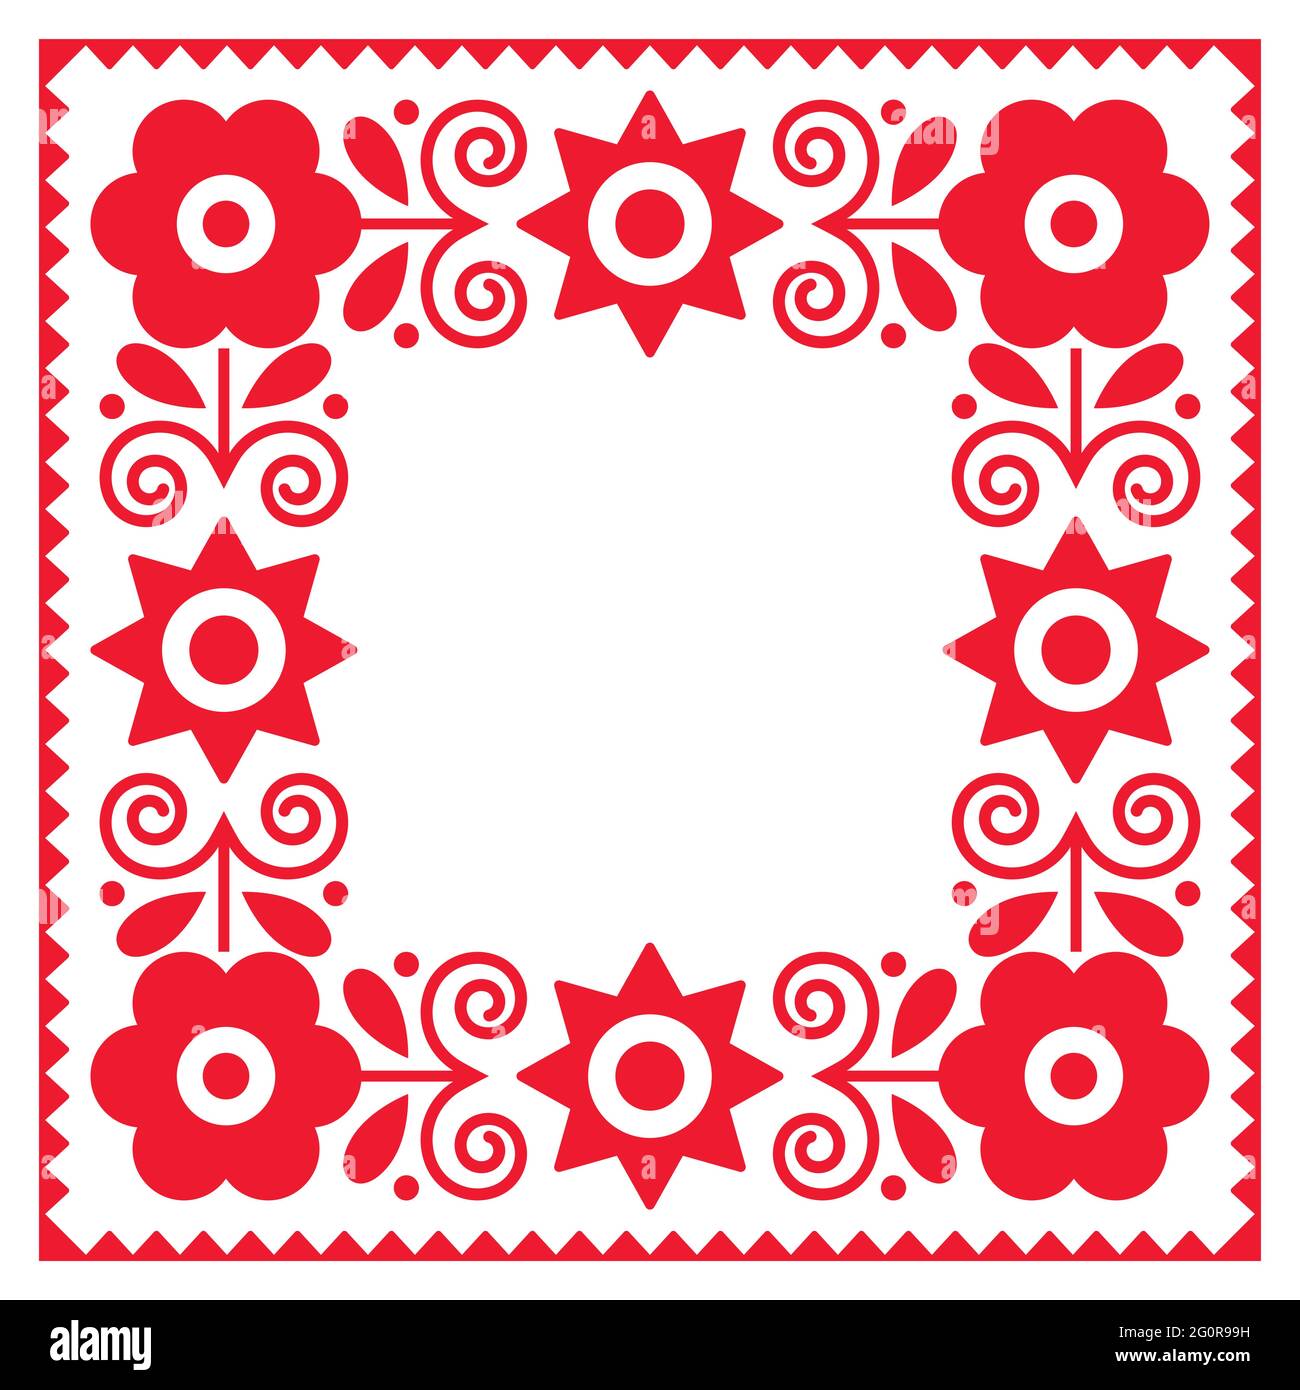 Polish traditional folk art square frame or border vector design with flowers, perfect for greeting card or wedding invitation Stock Vector